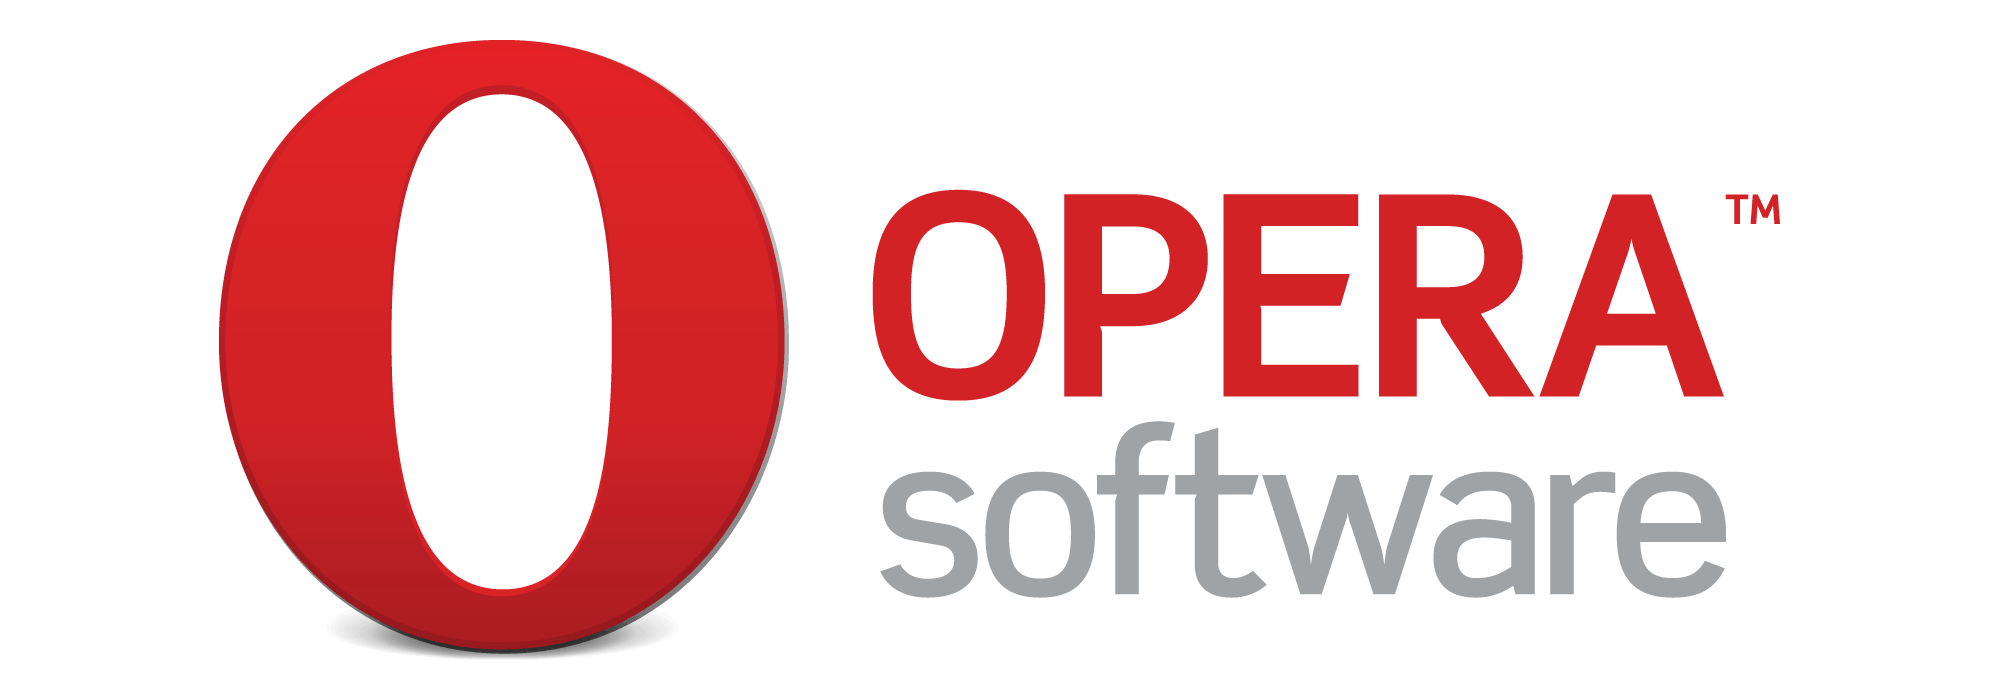 Old Opera Logo - India is now the biggest market for Opera Mini | The Tech Portal